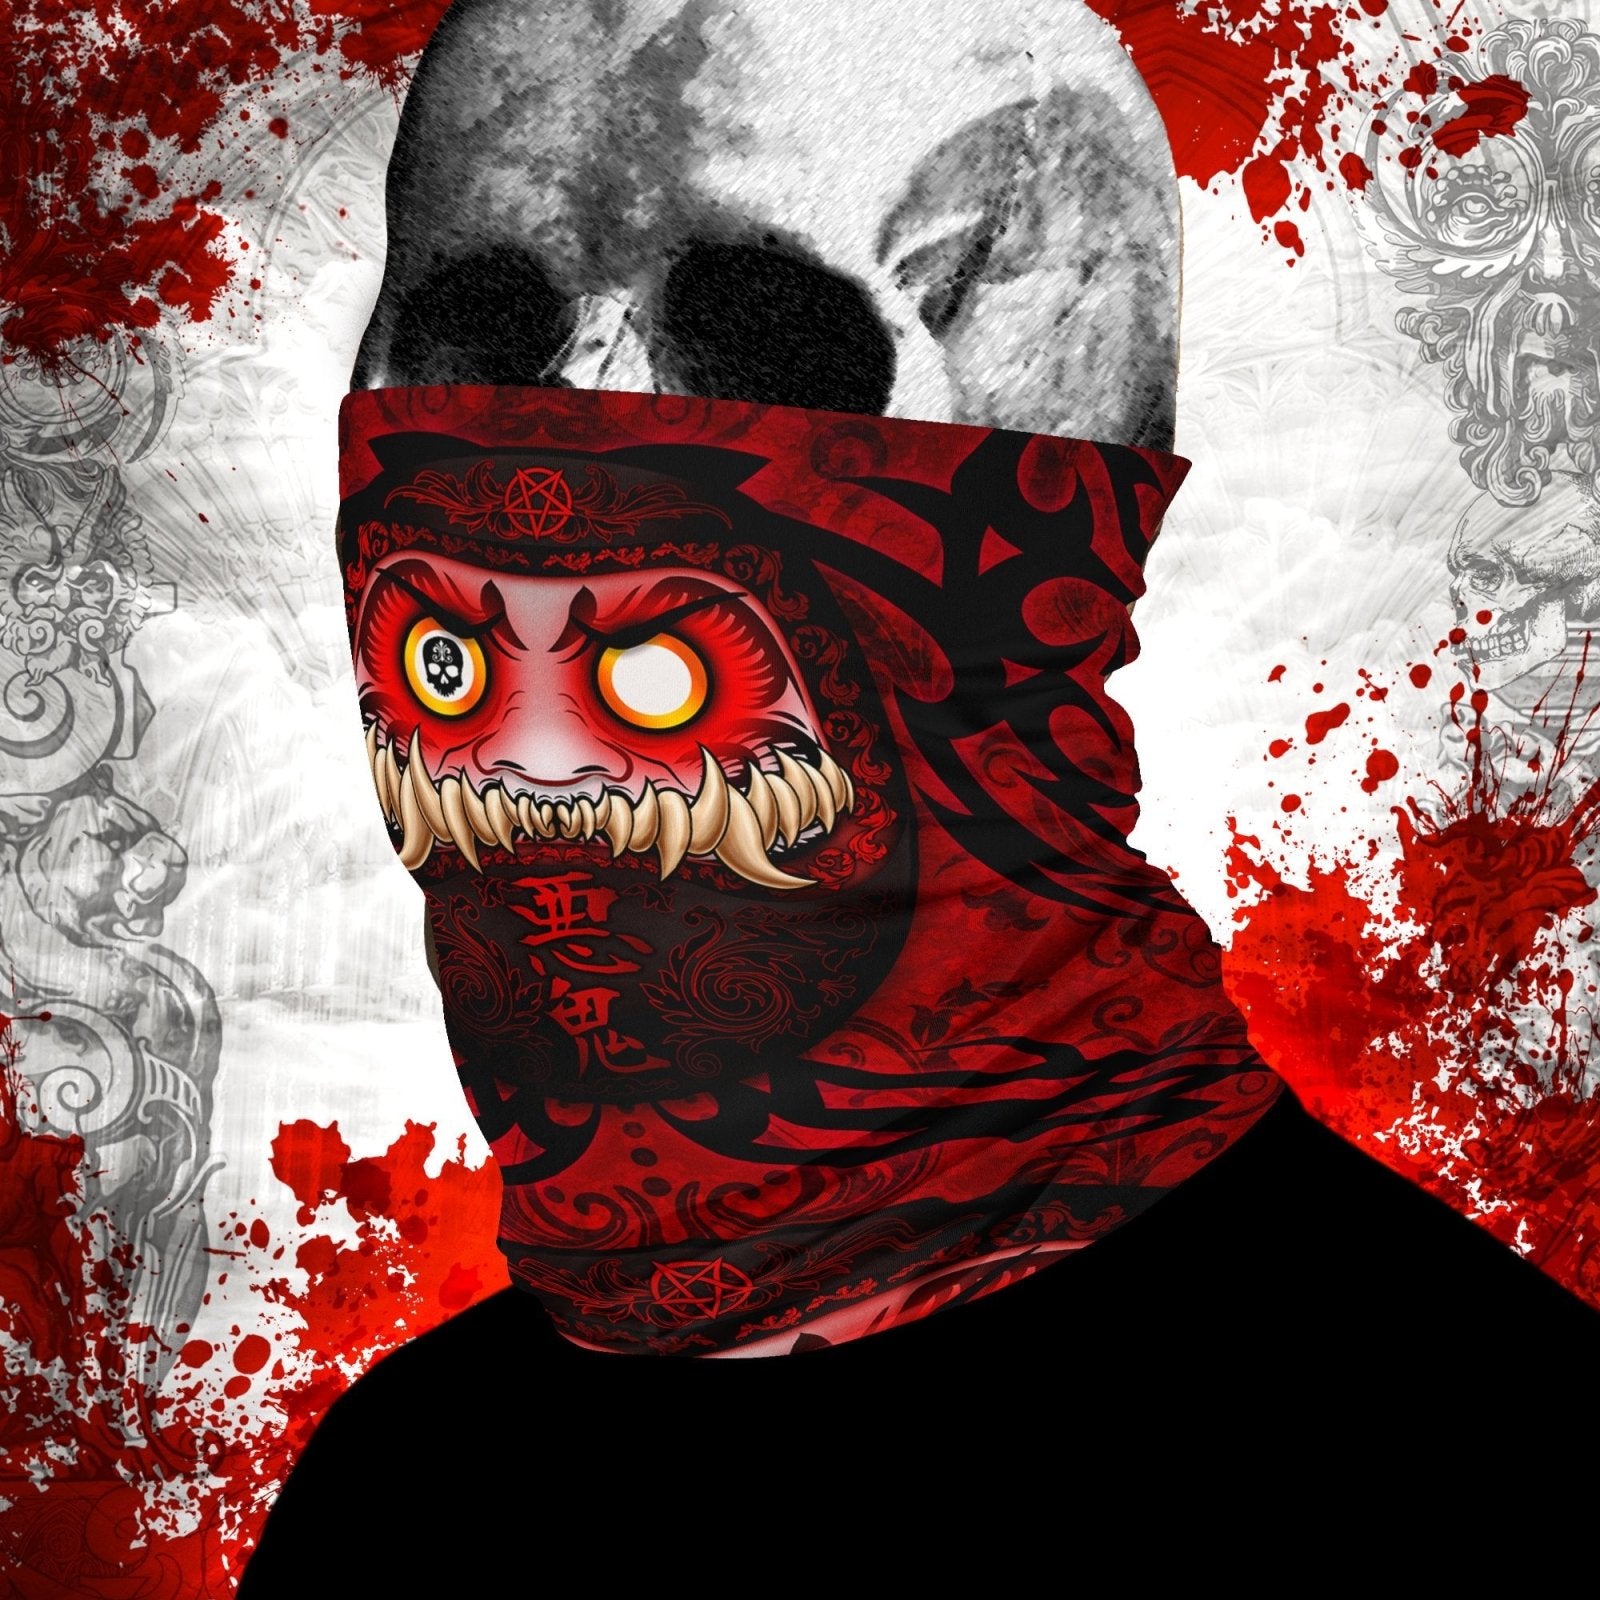 Demon Daruma Neck Gaiter, Face Mask, Head Covering, Funny Anime Style Outfit - Japanese Monster - Abysm Internal